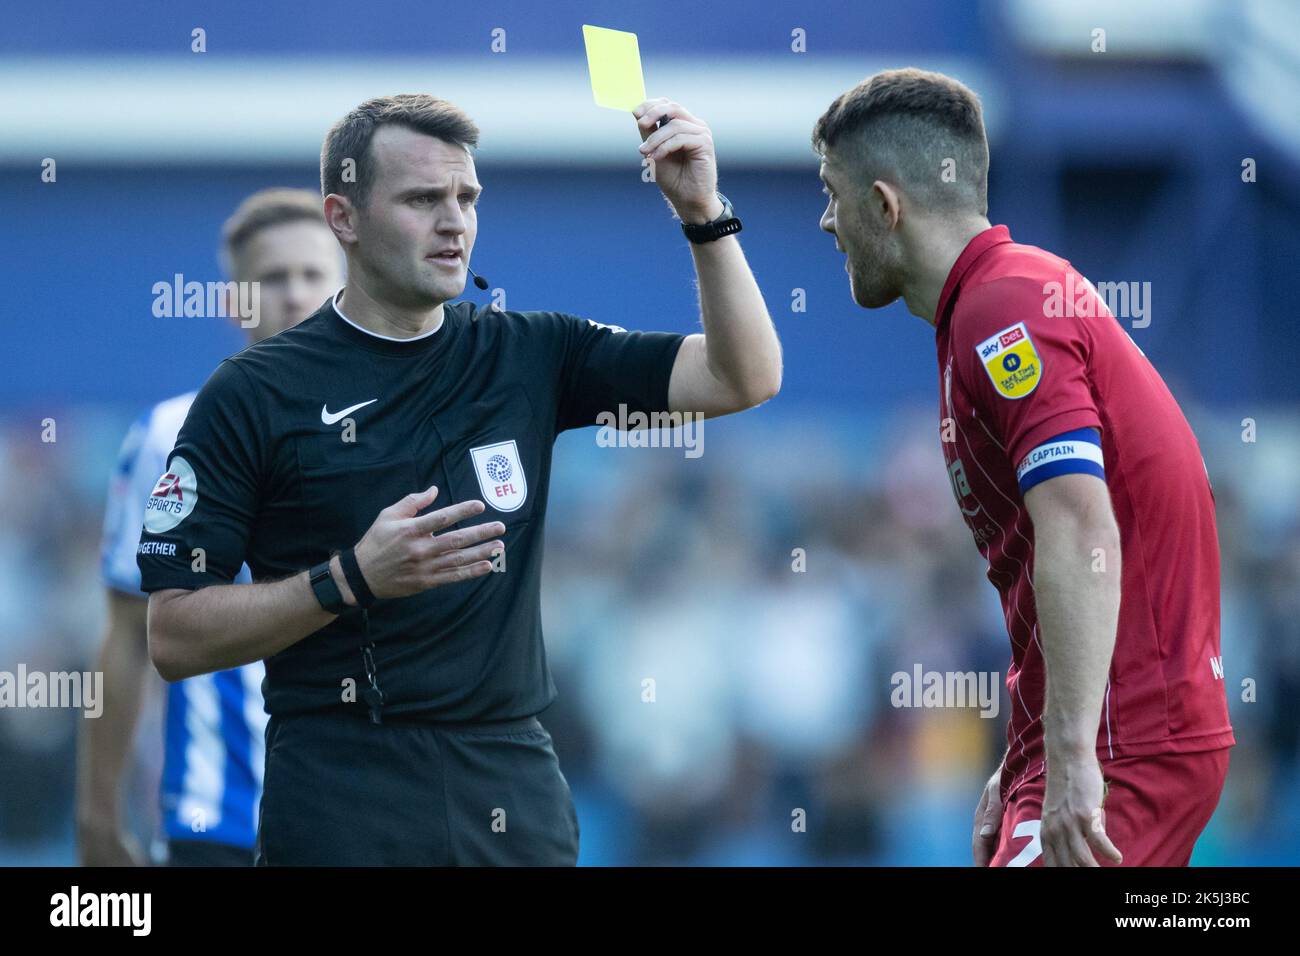 Referee Benjamin Speedie awards a yellow card to Sean Long #2 of Cheltenham Town during the Sky Bet League 1 match Sheffield Wednesday vs Cheltenham Town at Hillsborough, Sheffield, United Kingdom, 8th October 2022  (Photo by James Heaton/News Images) Stock Photo